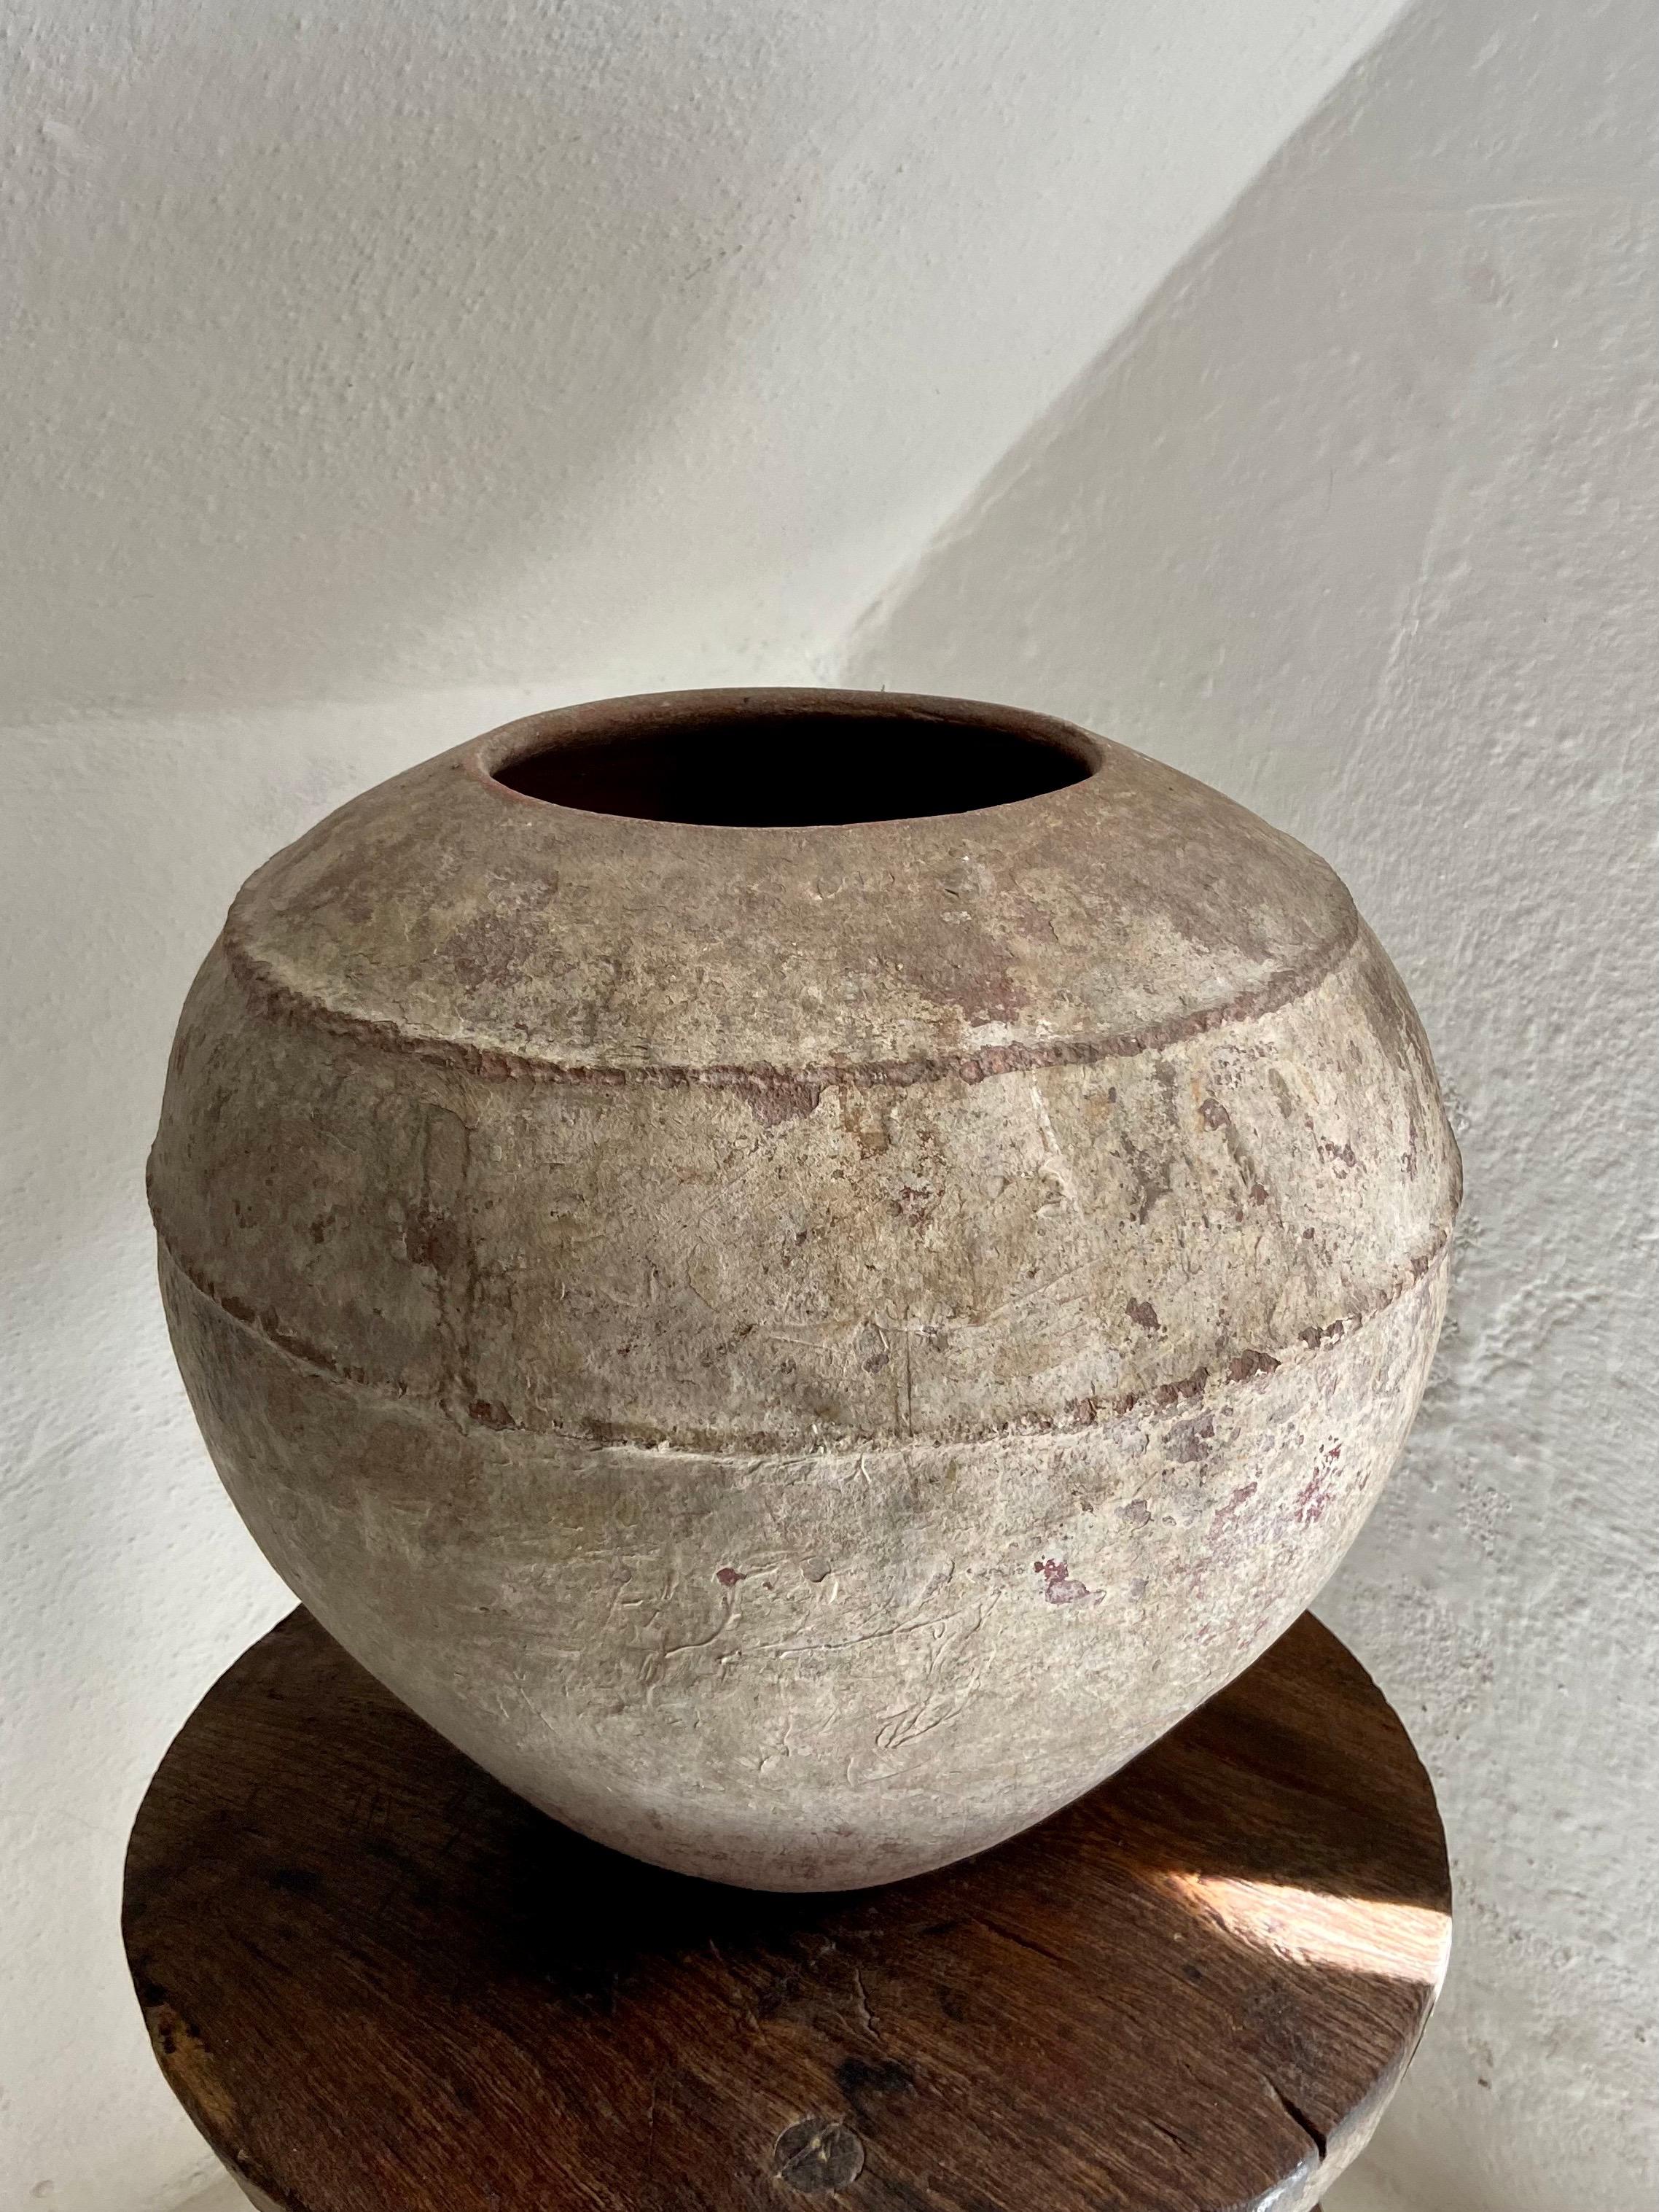 Ceramic water vessel from the Yucatan Peninsula, Mexico, circa early 20th century. Hand crafted between 1920's and 1940's.